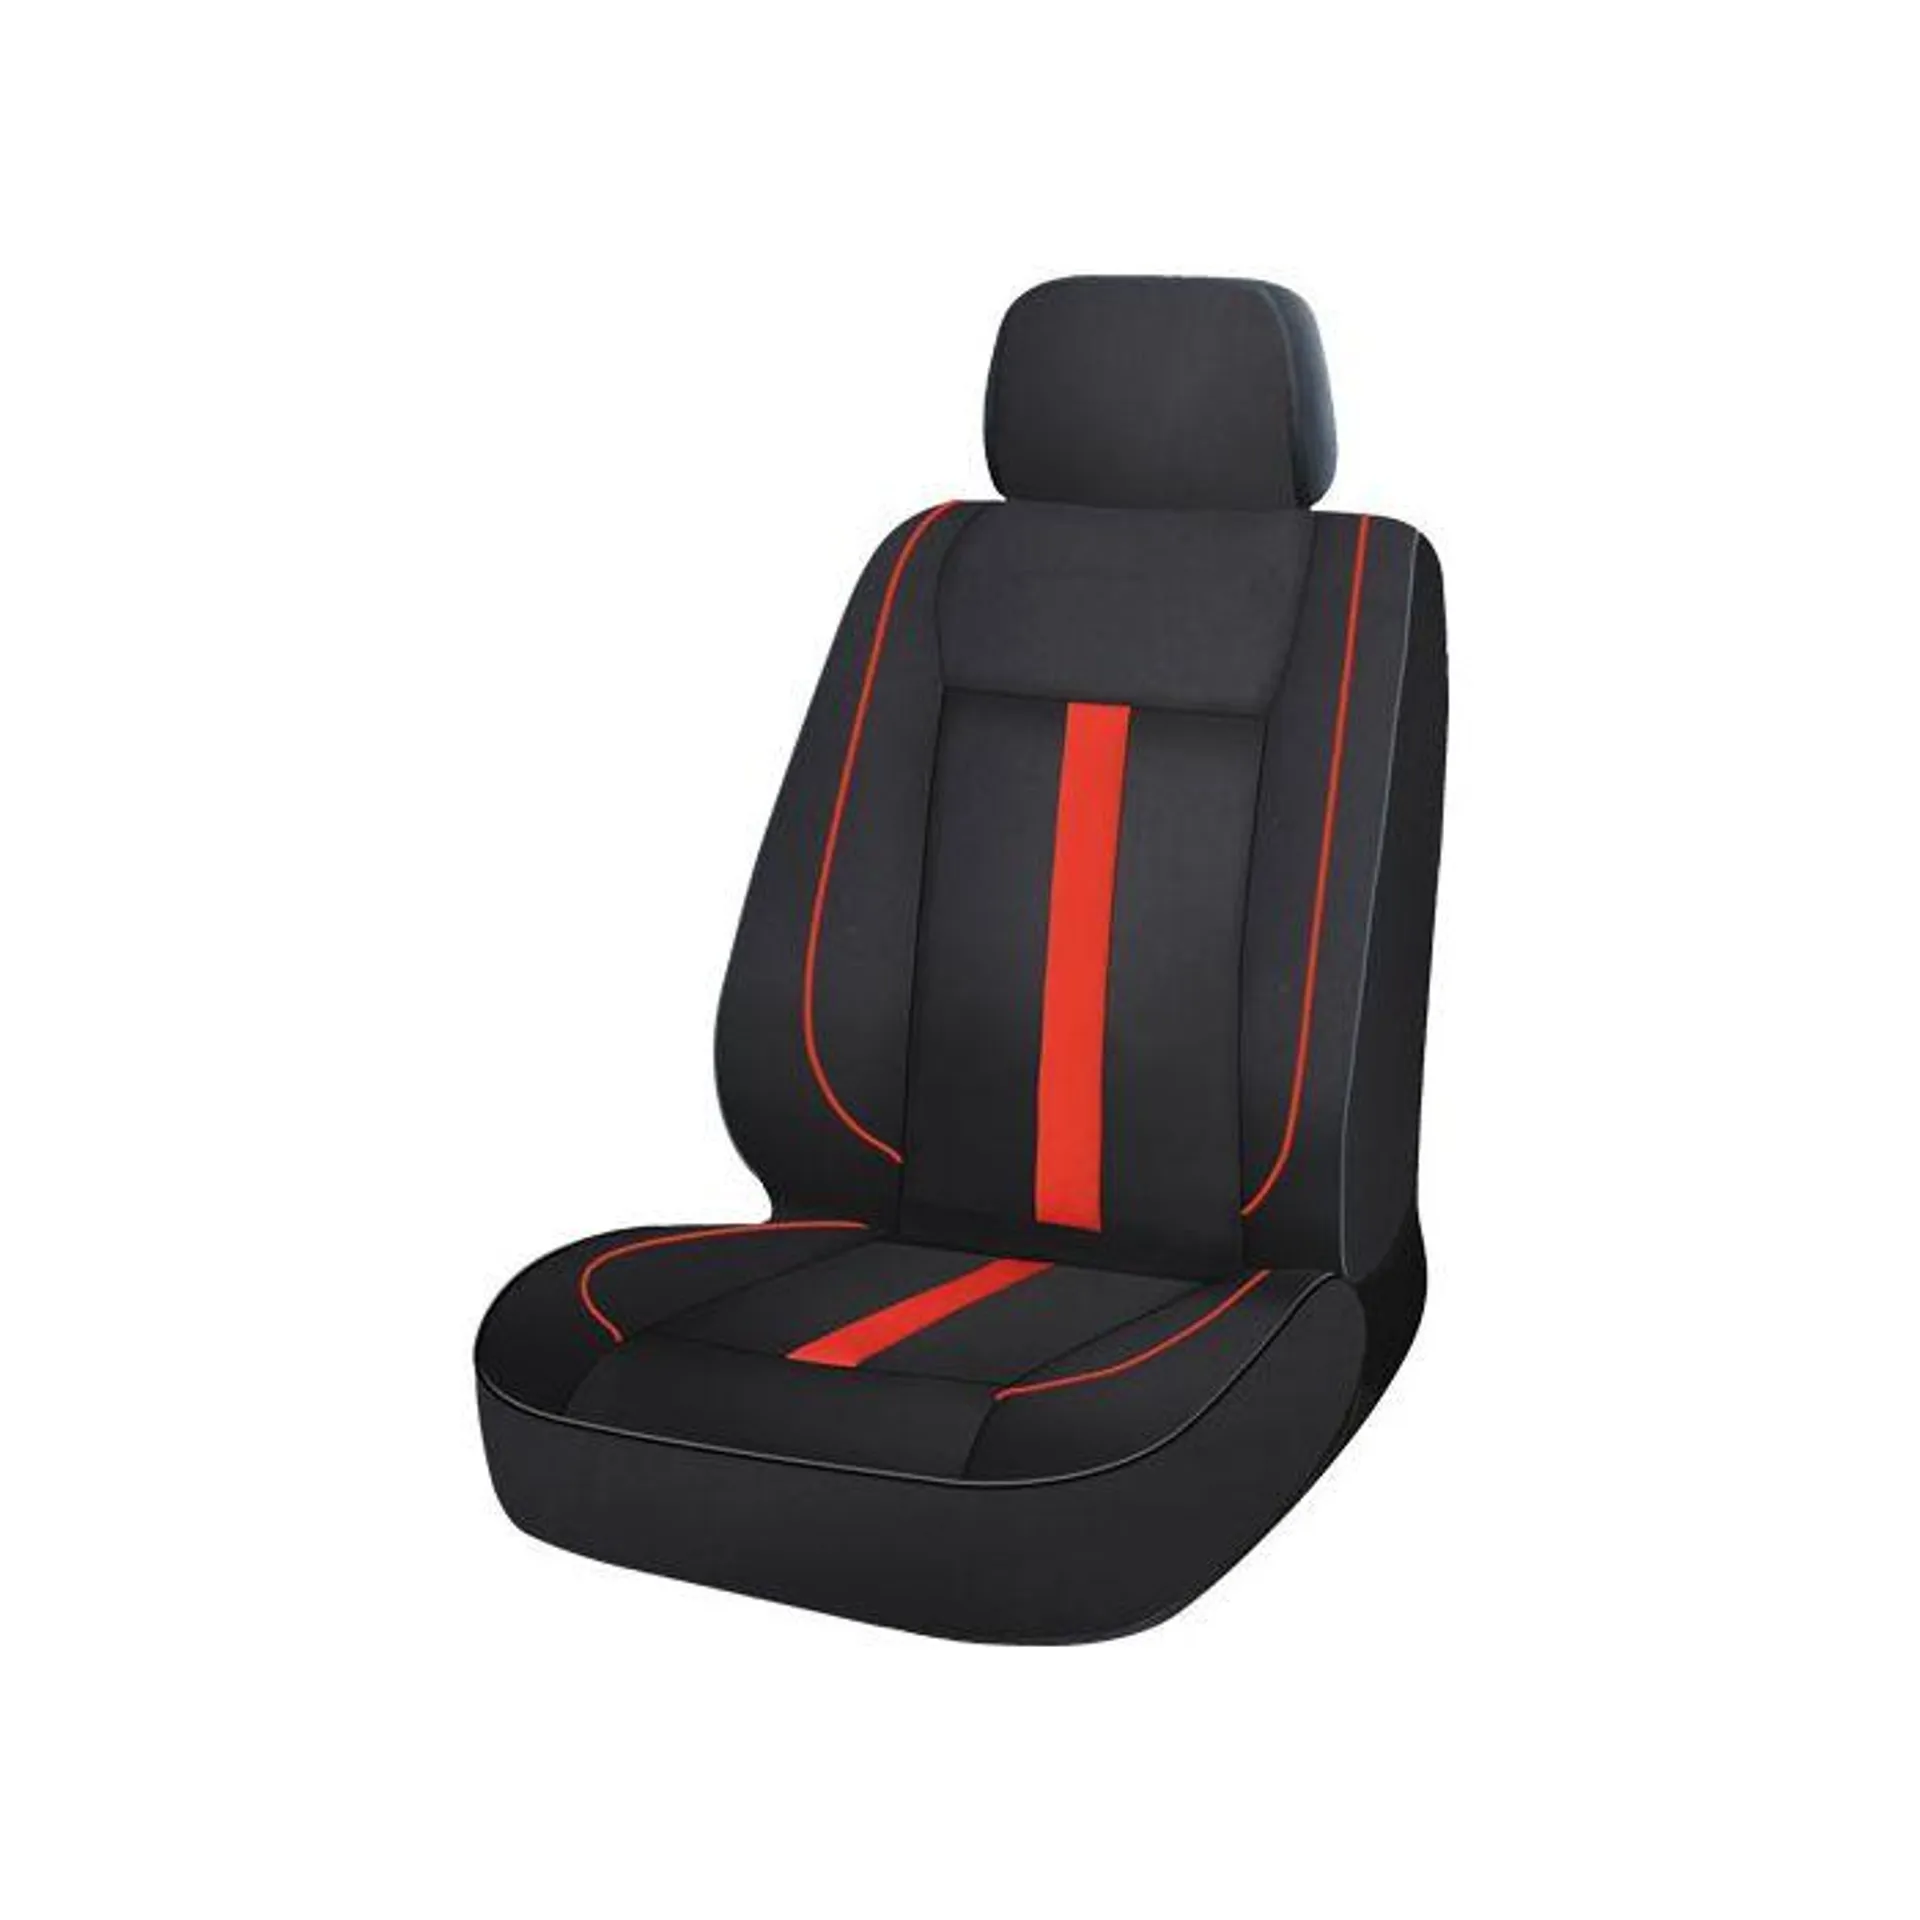 DELUXE SEAT CUSHION BLACK/RED